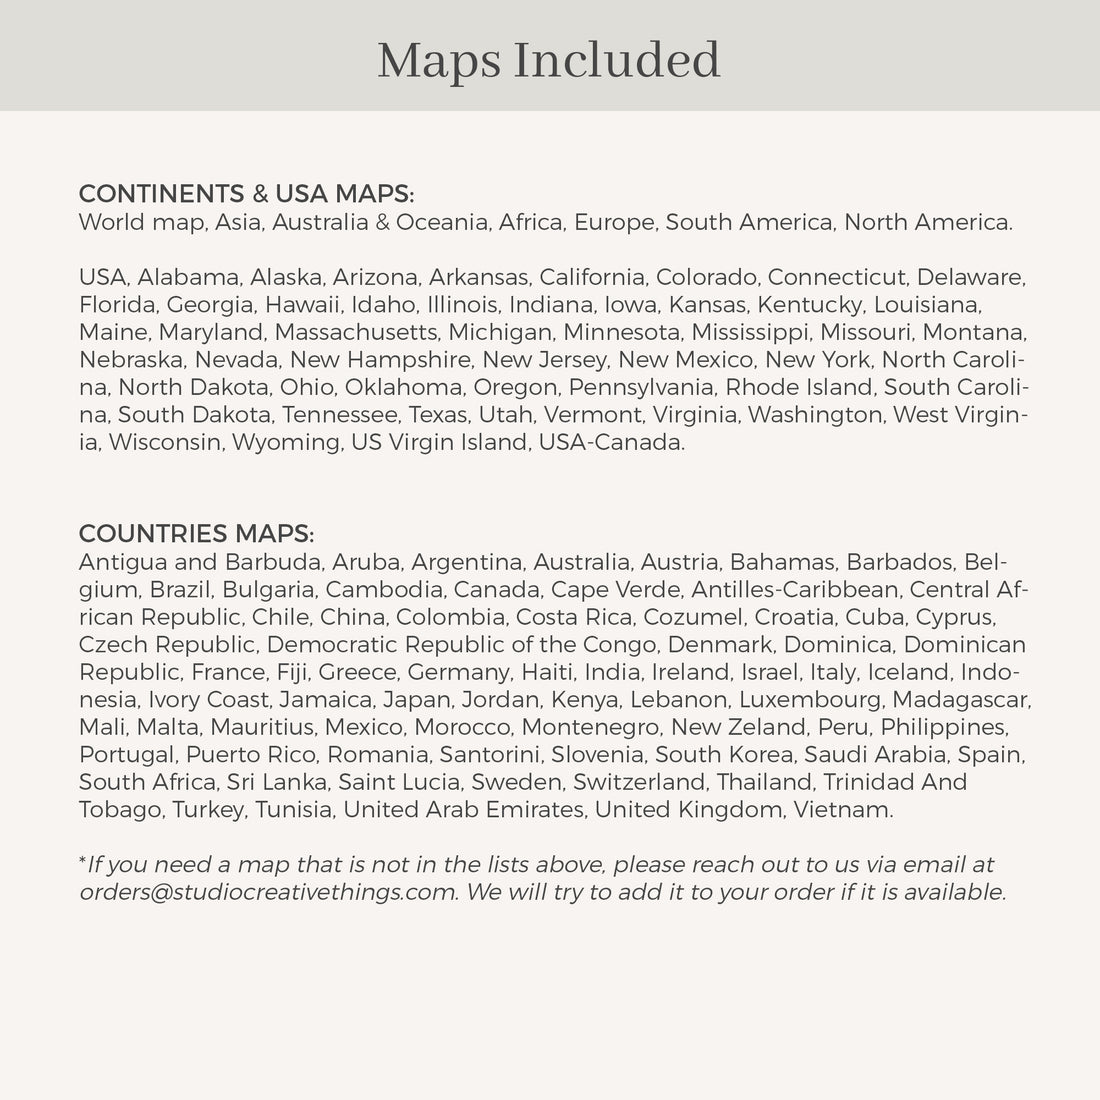 Sofia | World Map Save the Date Card Template